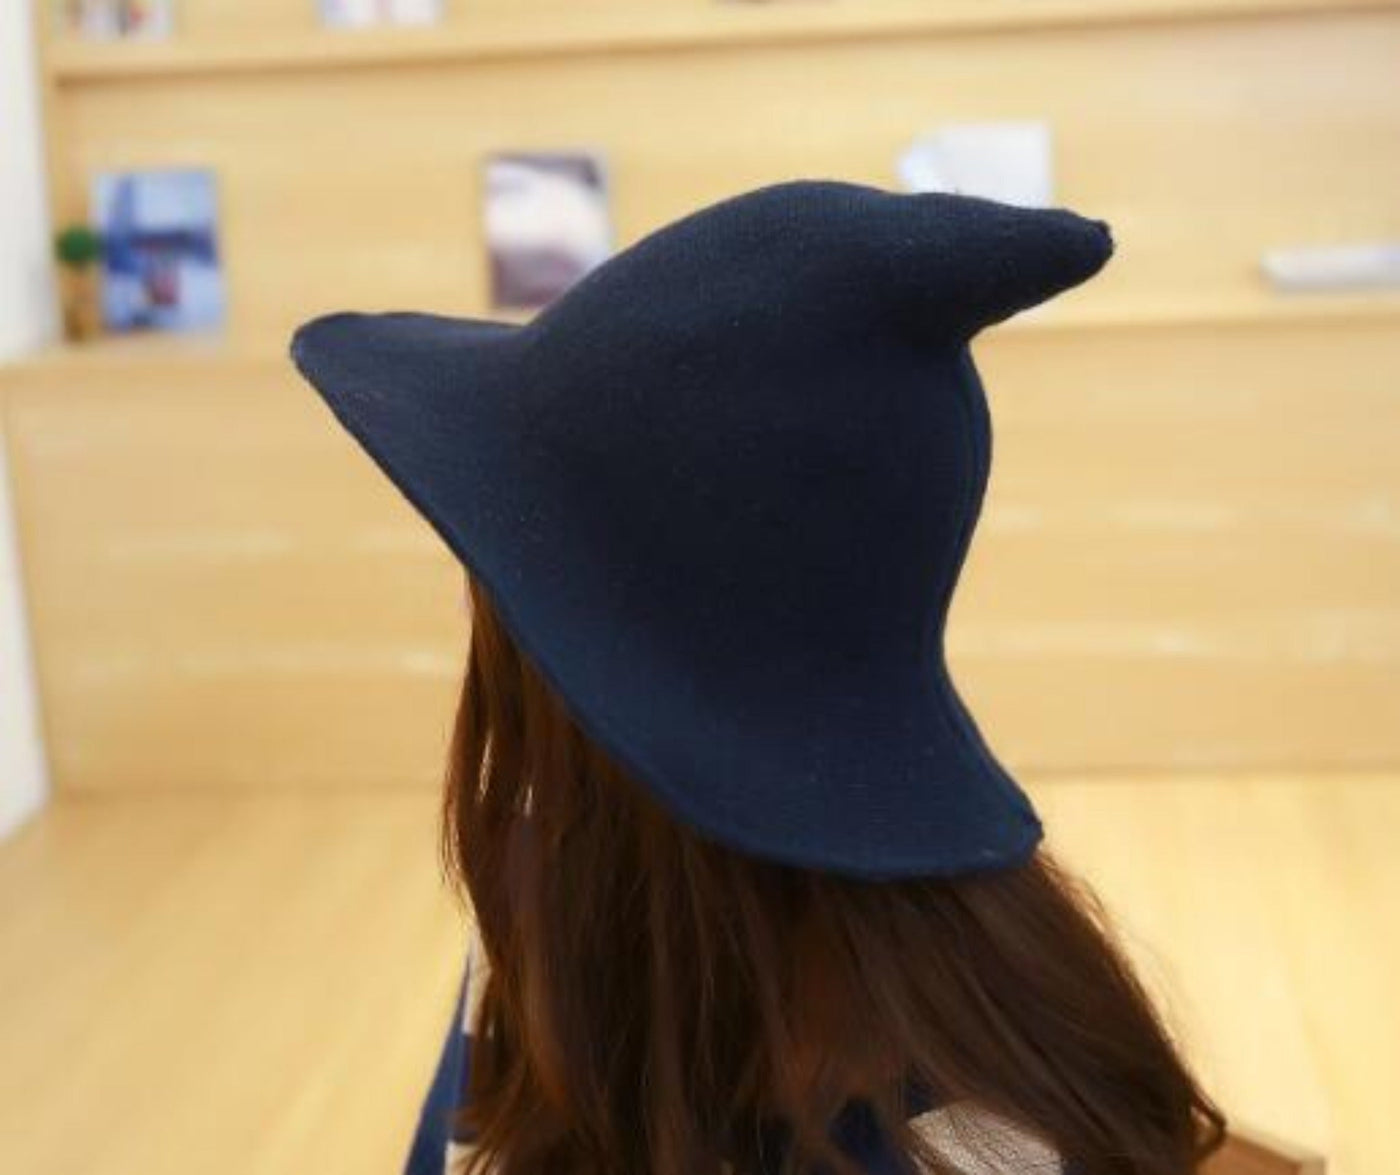 The Classic Witch Hat